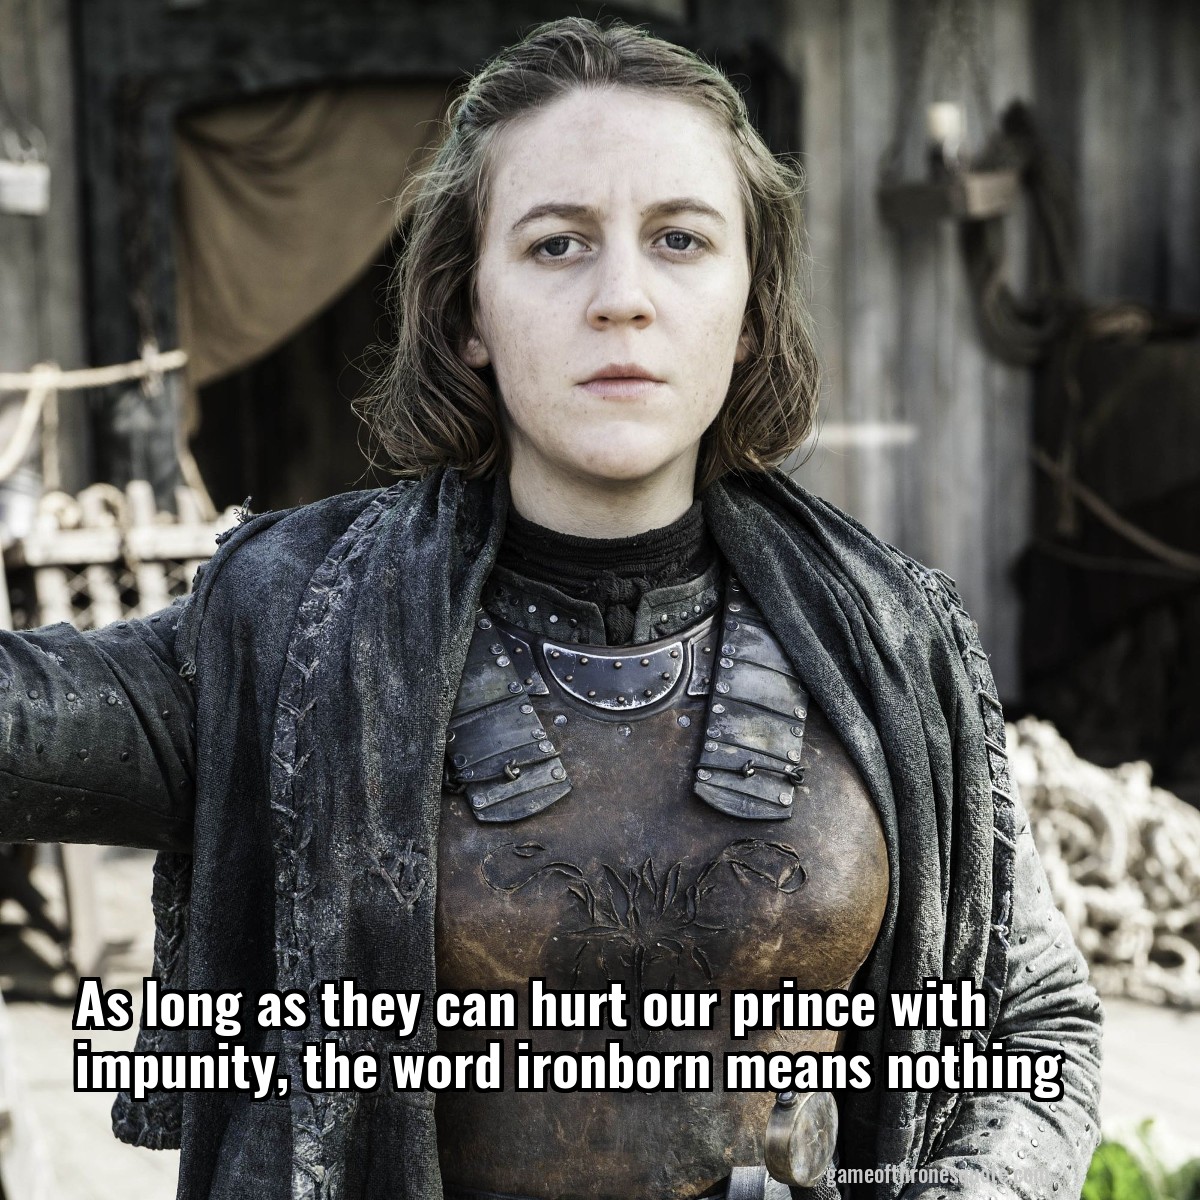 As long as they can hurt our prince with impunity, the word ironborn means nothing